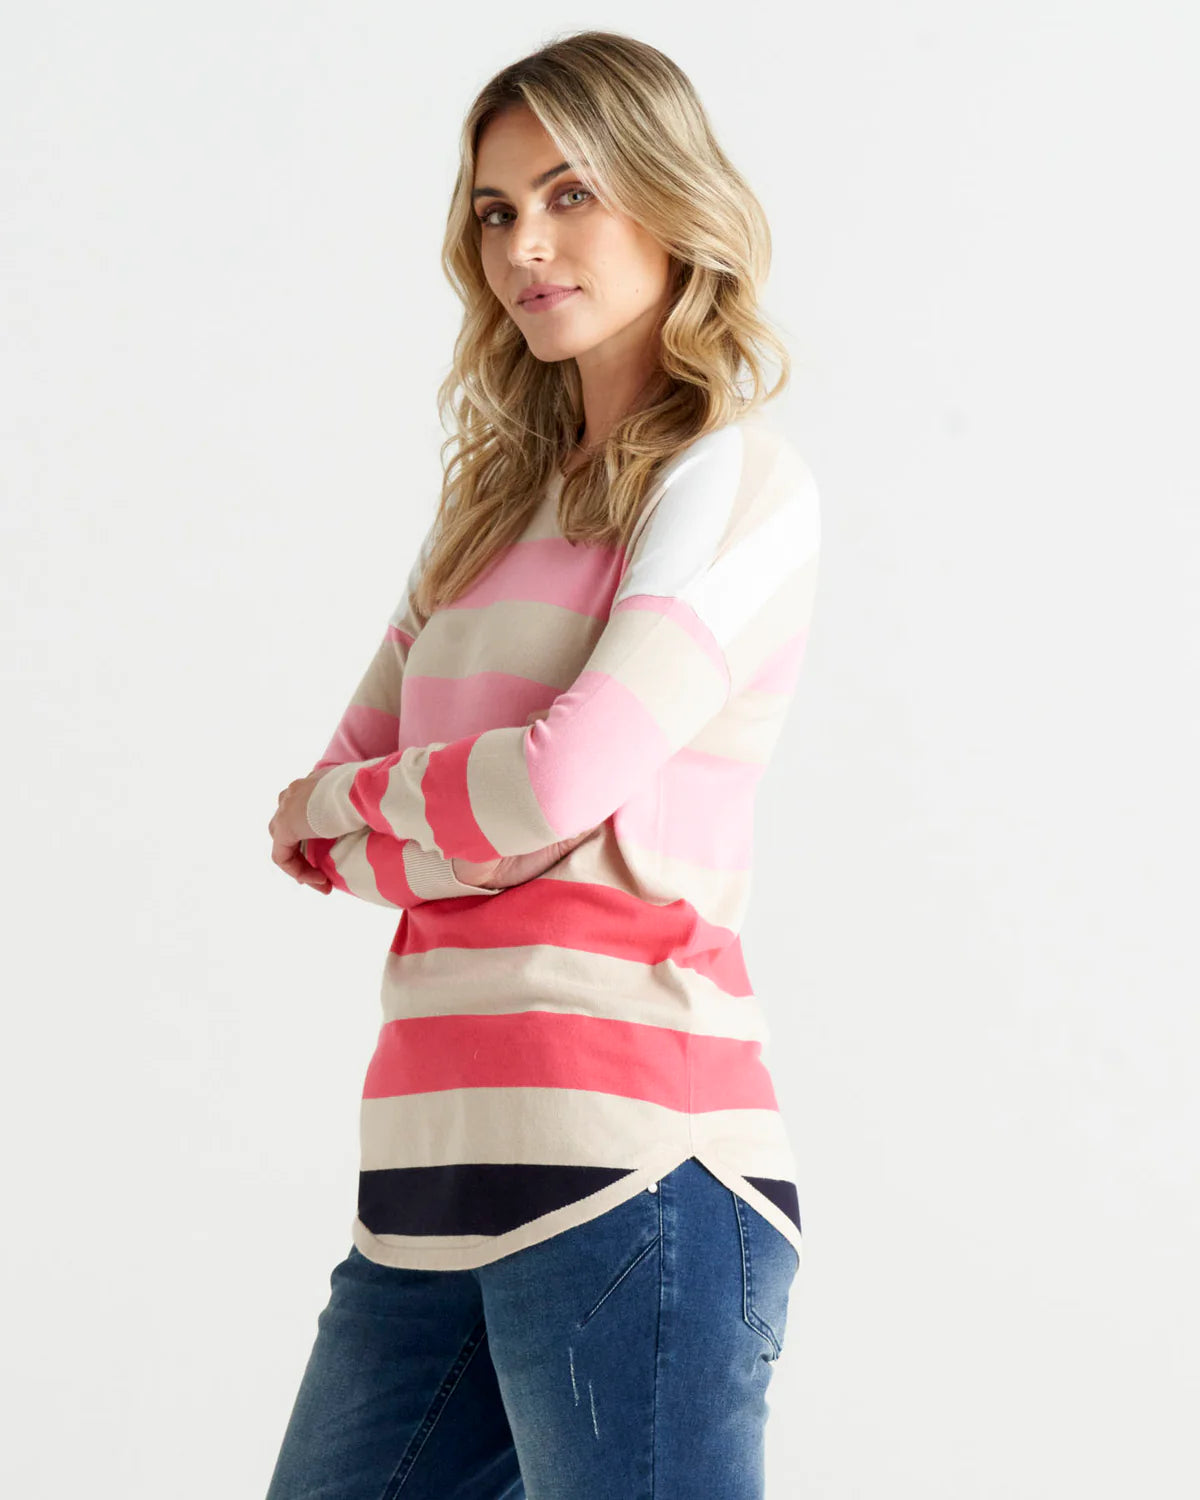 Sophie Knit Jumper: Made with soft and super stretchy knitted fabric, this jumper is like wearing a warm hug all day long. And because it's lightweight, it's perfect for those tricky tr - Ciao Bella Dresses - Betty Basics